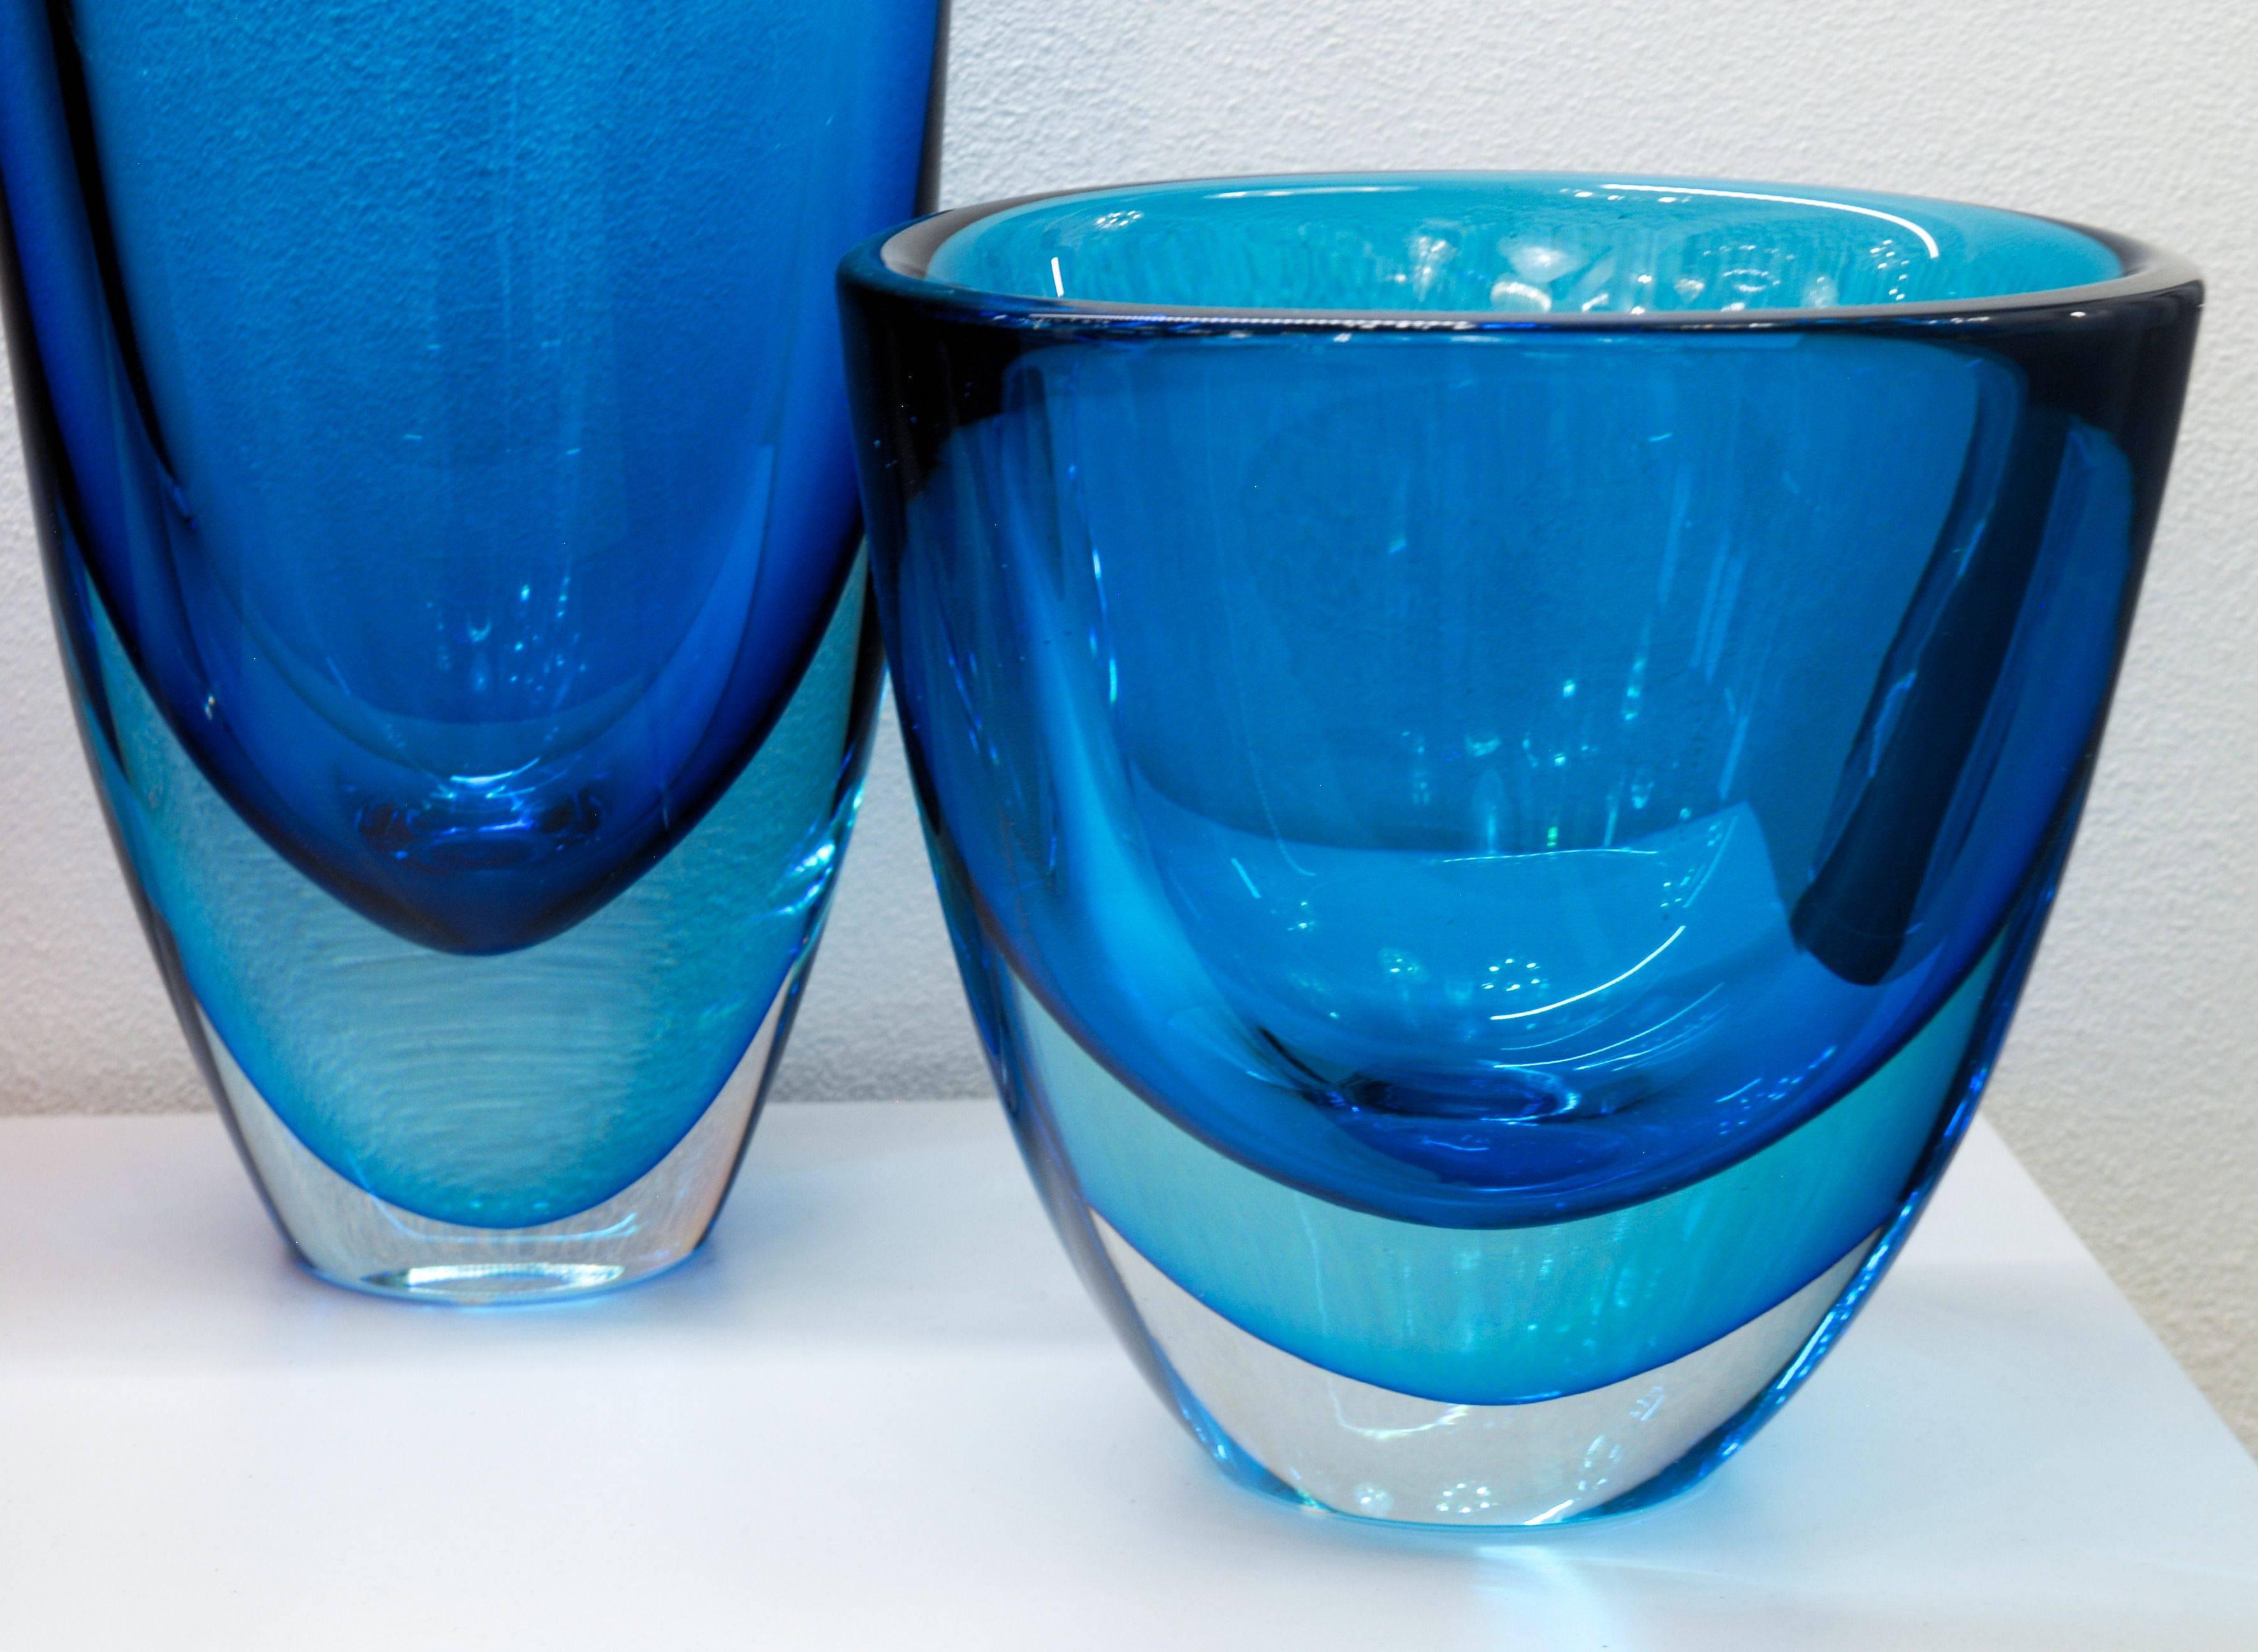 Stefano Toso Pair of Sommerso Acquamare and Cobalt Vases, Massiccio with Sbruffi 1